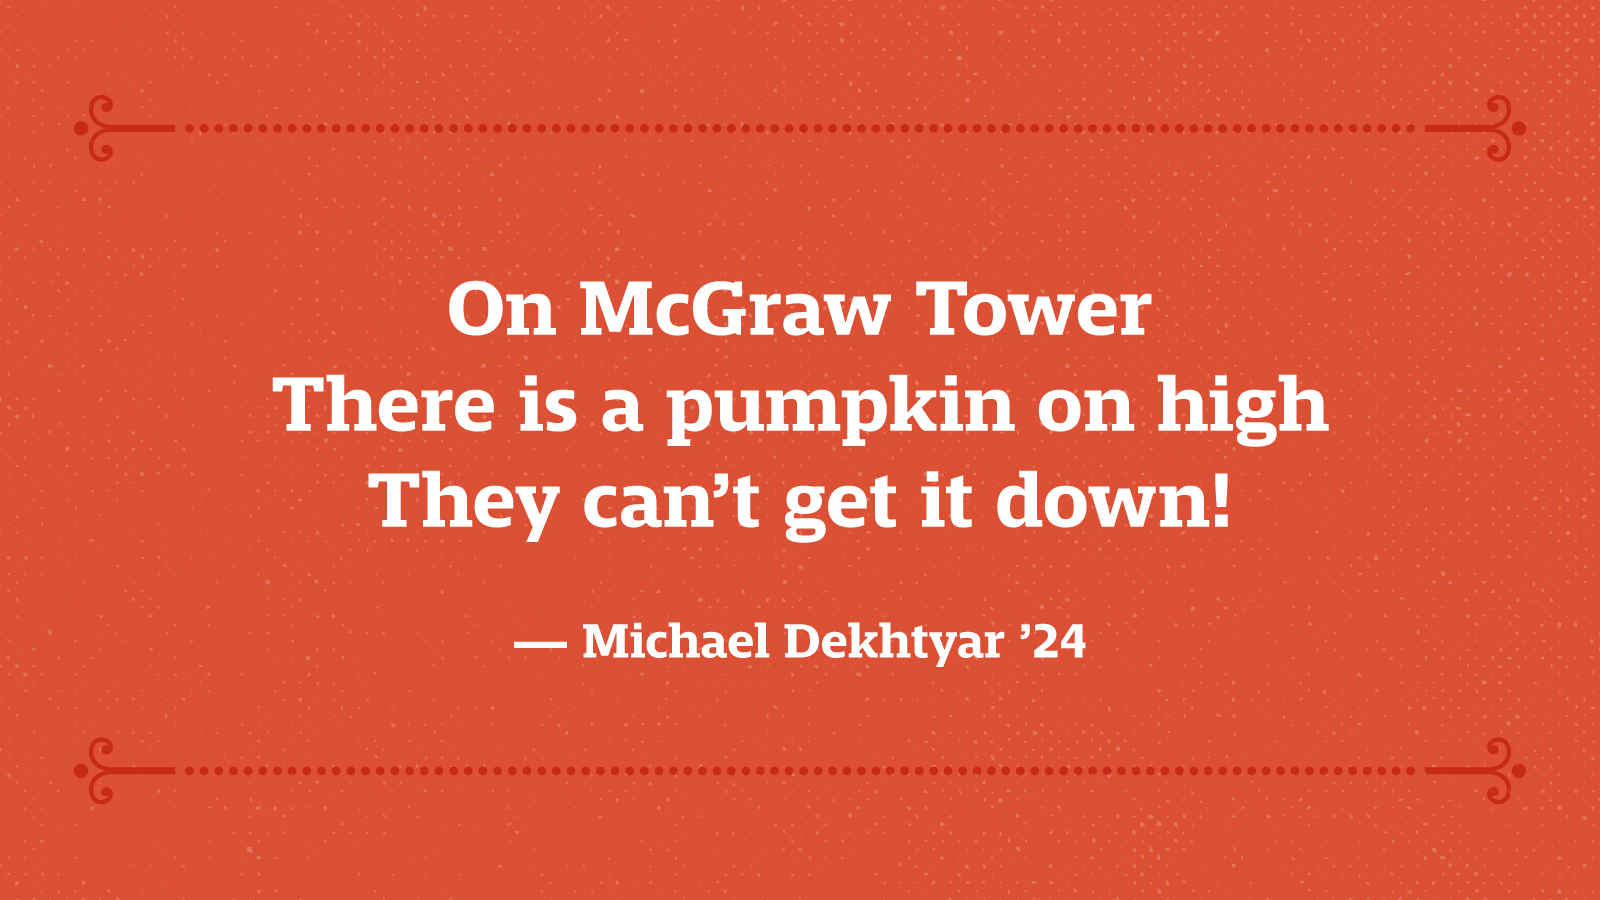 On McGraw Tower There is a pumpkin on high They can’t get it down! — Michael Dekhtyar ’24